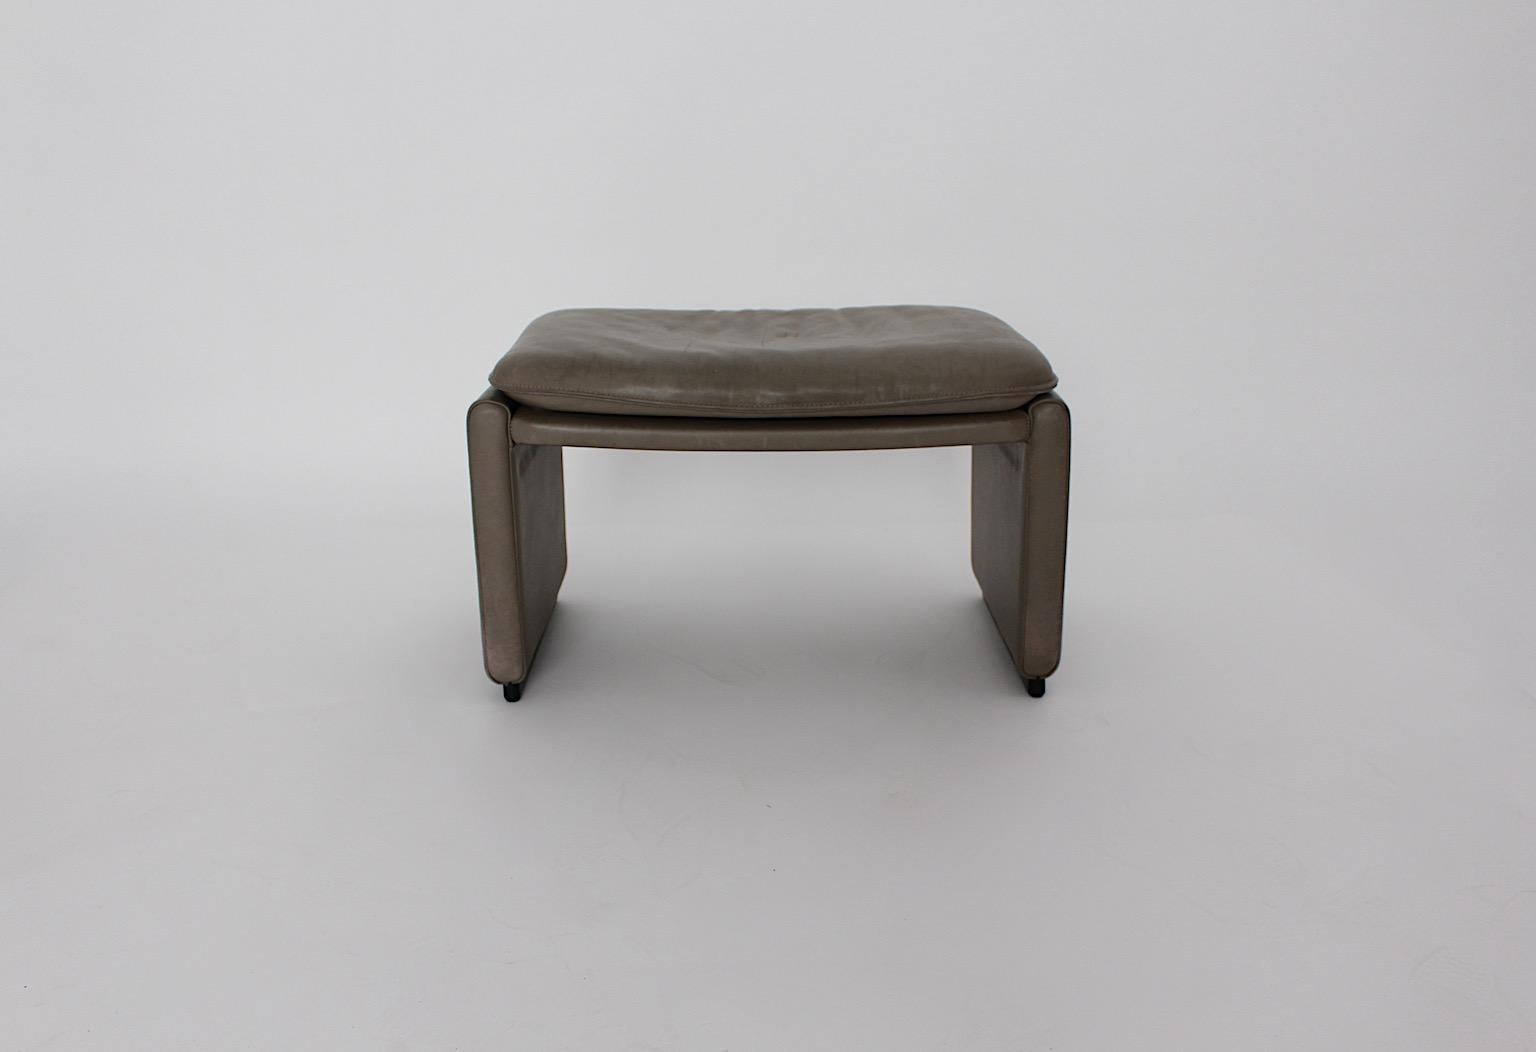 Late 20th Century Modern Grey Leather De Sede Footstool or Stool 1980s Switzerland For Sale